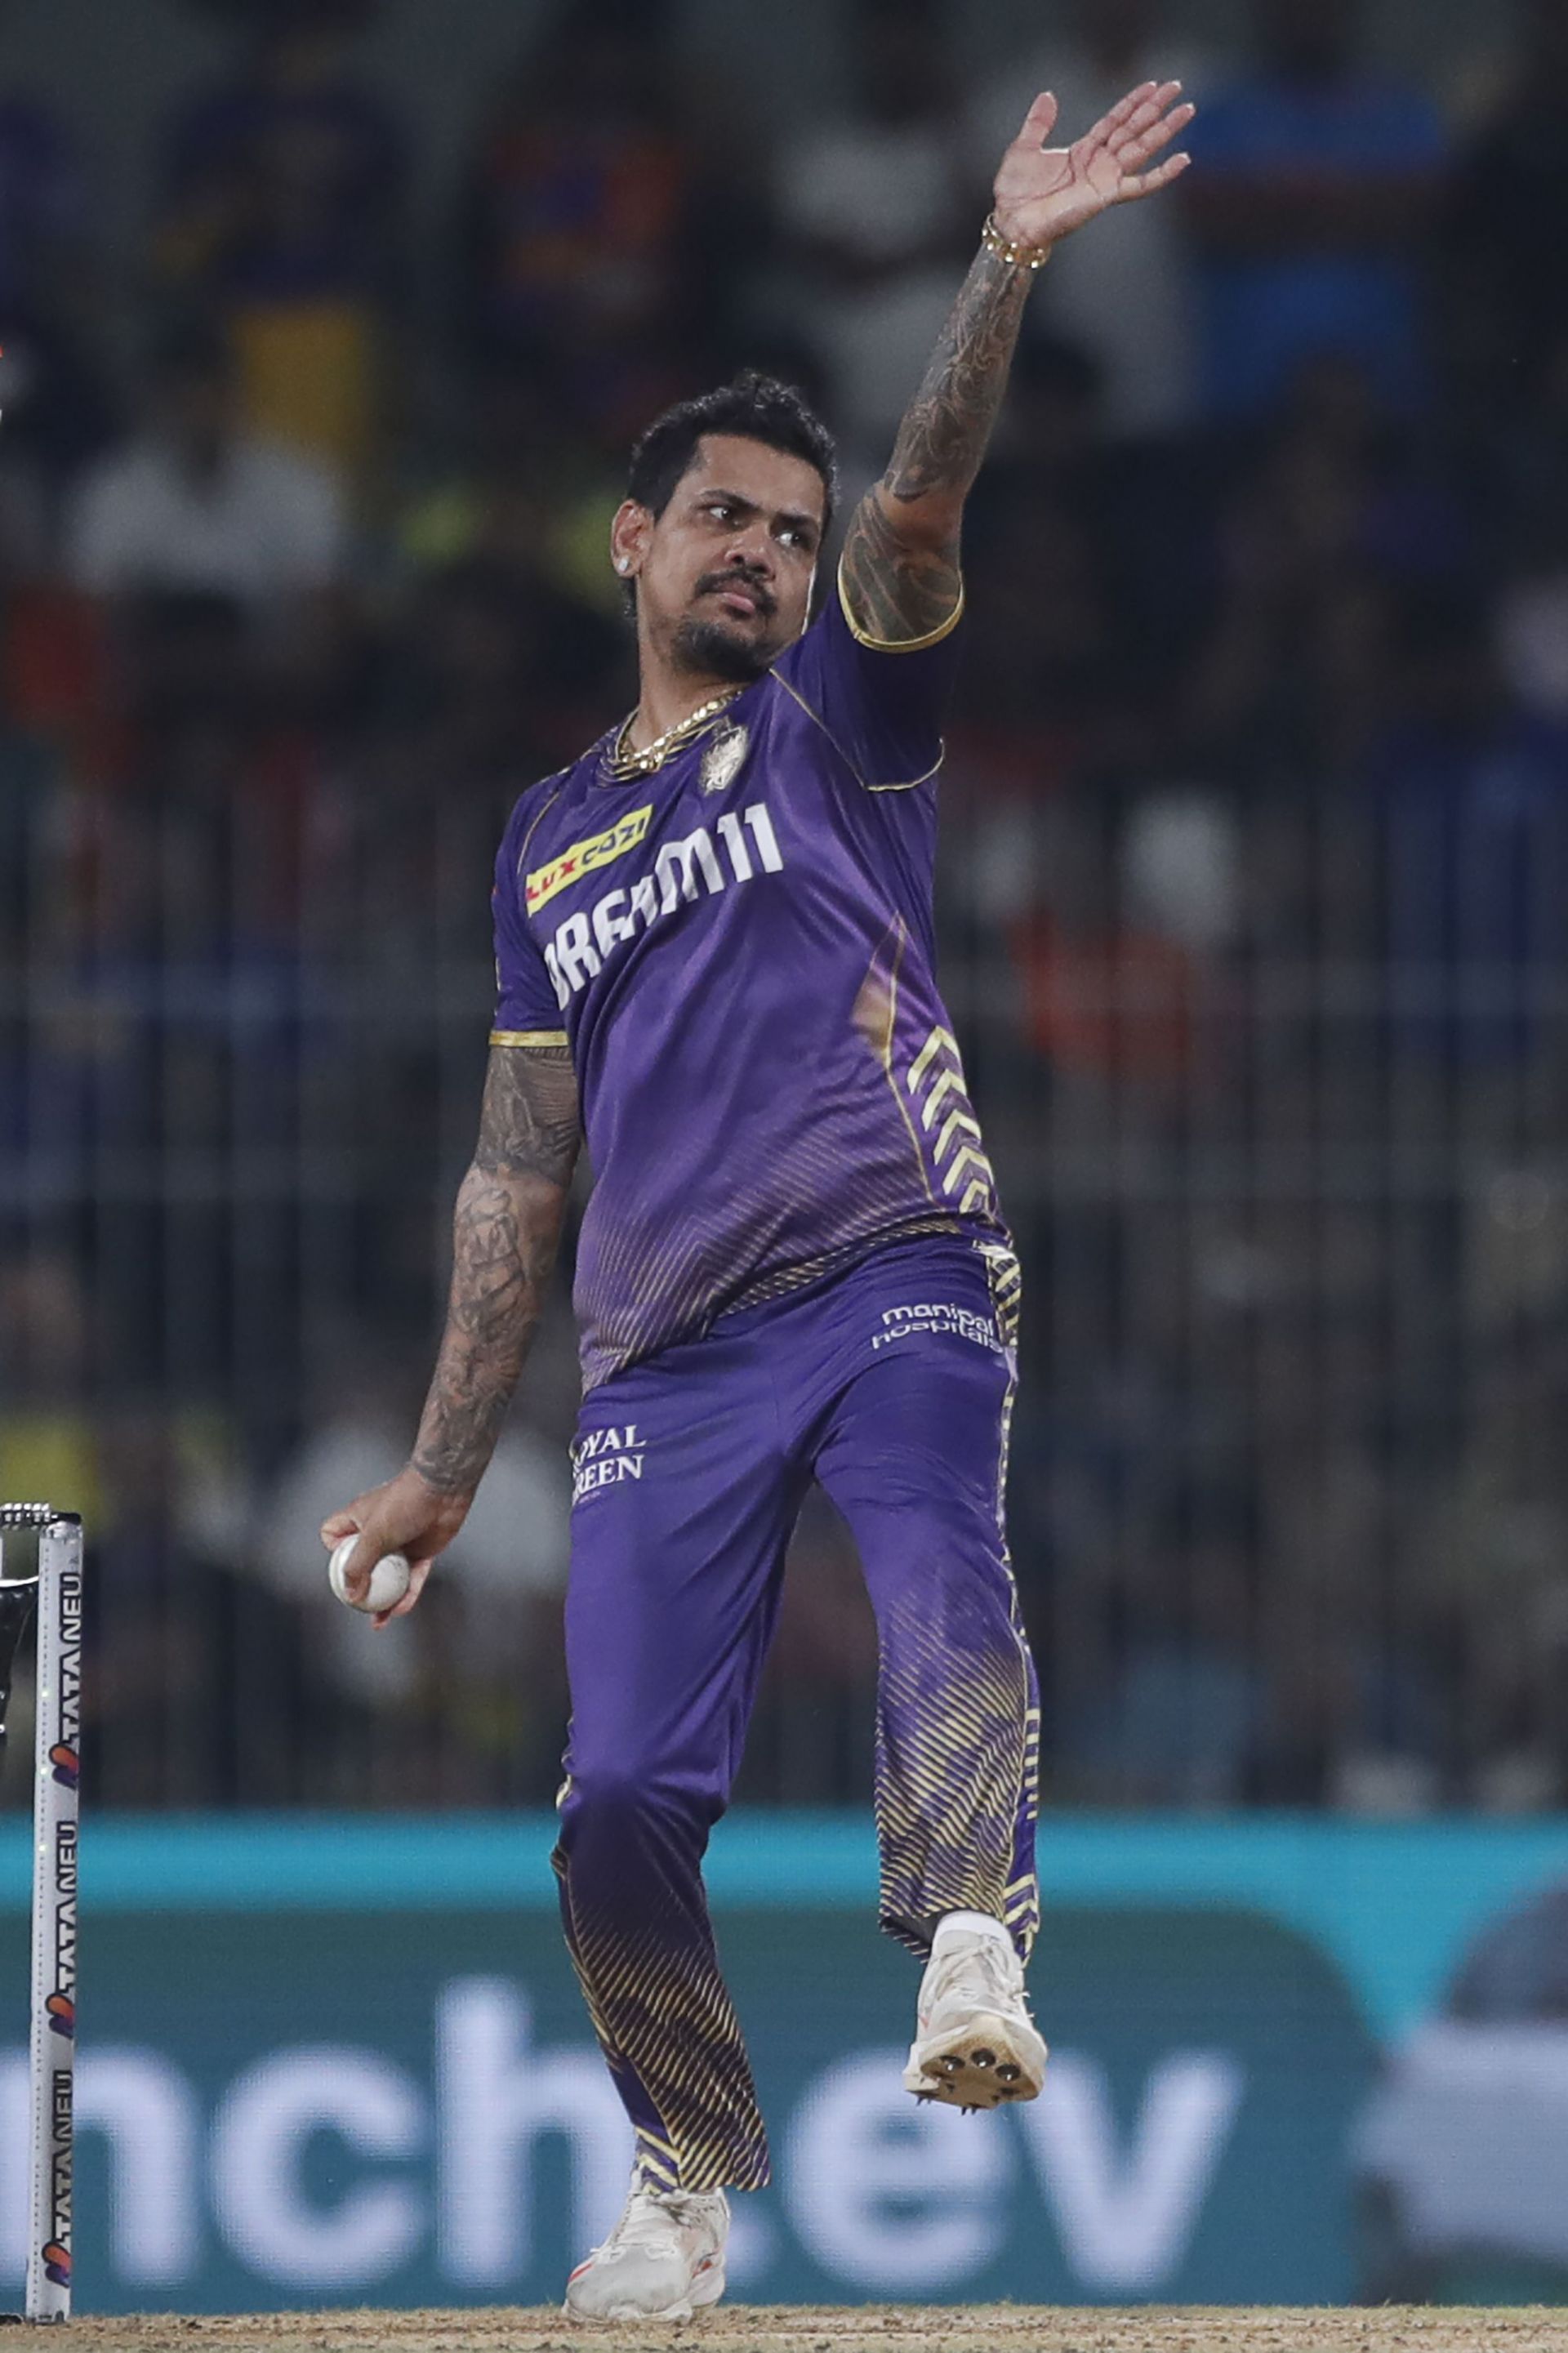 Sunil Narine in action for Kolkata Knight Riders in the IPL.